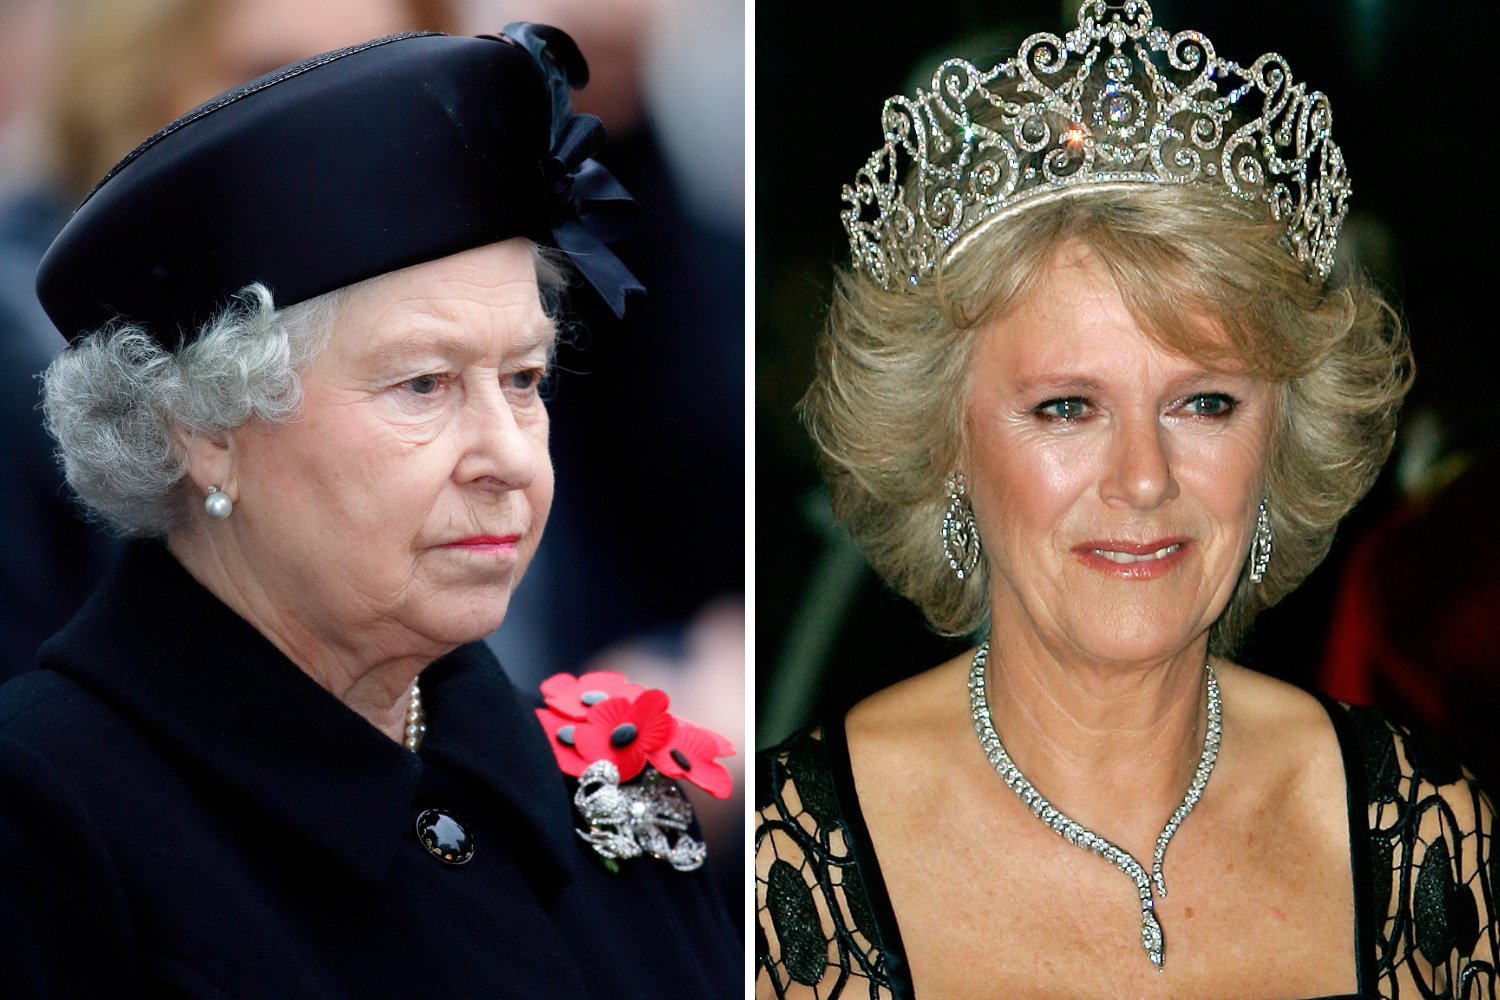 Queen Elizabeth Always Detested Camilla Parker Bowles—Charles Biographer pic